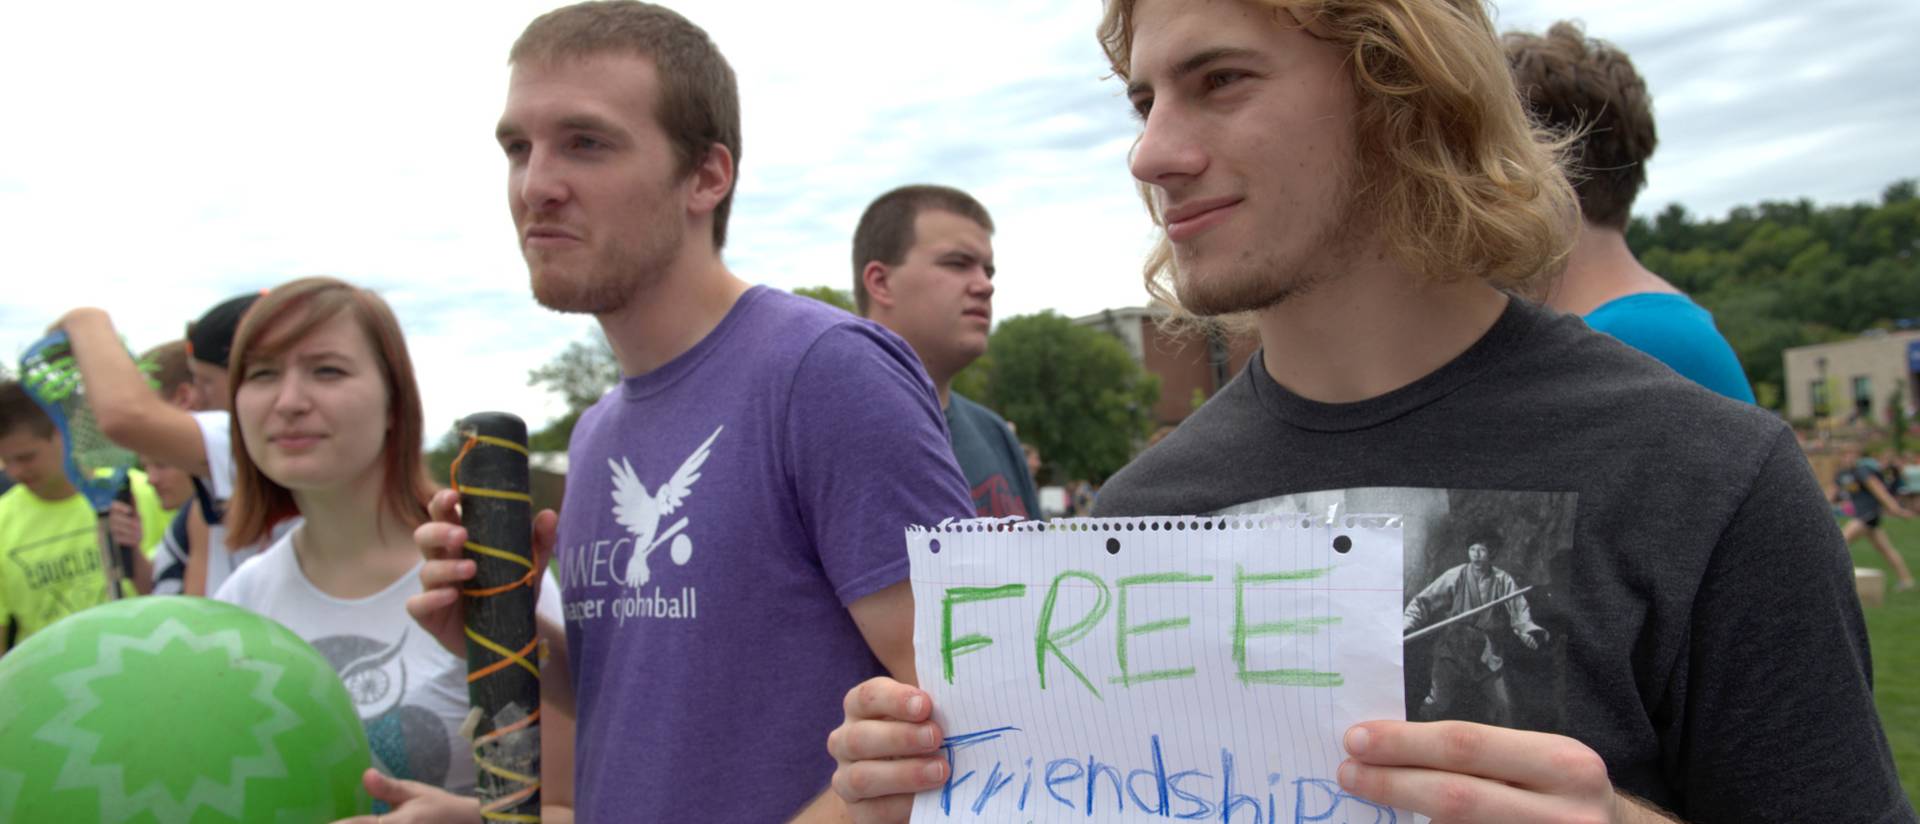 Three students recruiting for their student organization with a "Free friendships" sign.